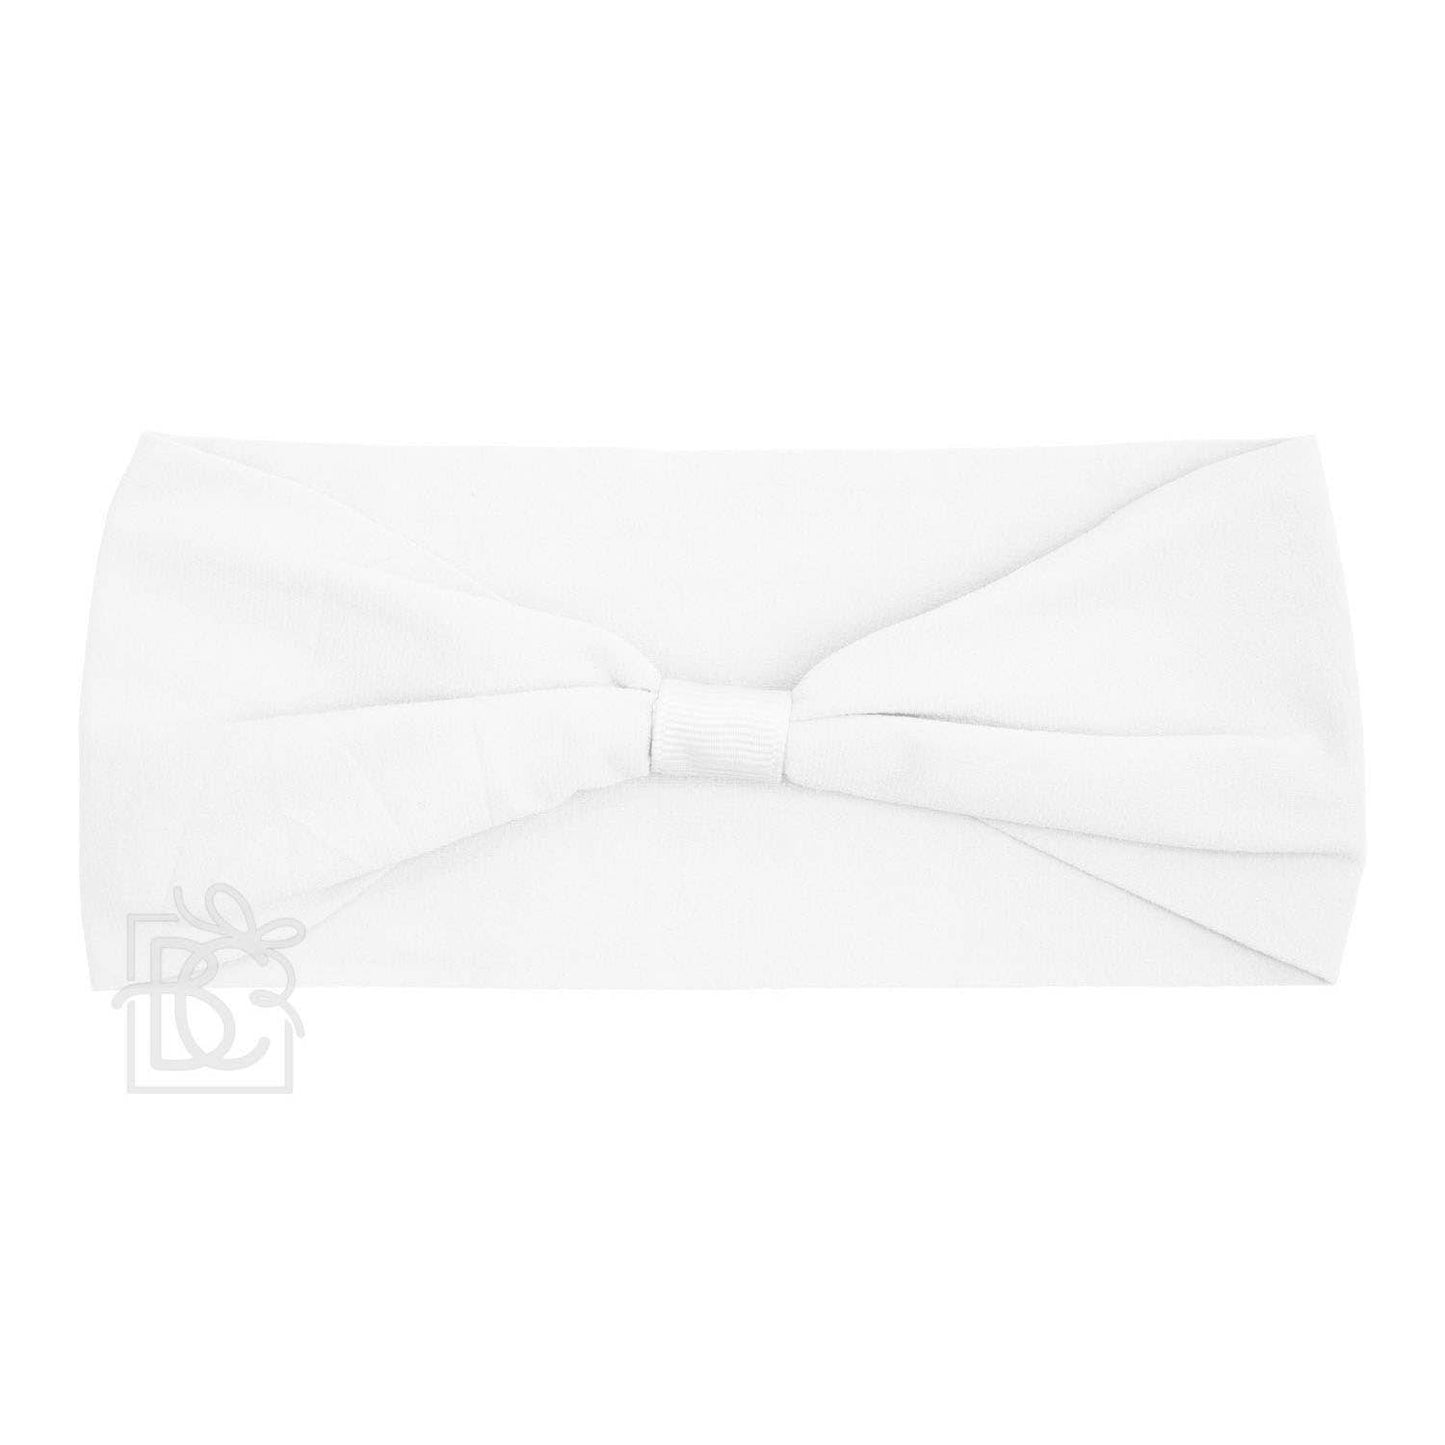 Beyond Creations White Wide Pantyhose Add-A-Bow Headband